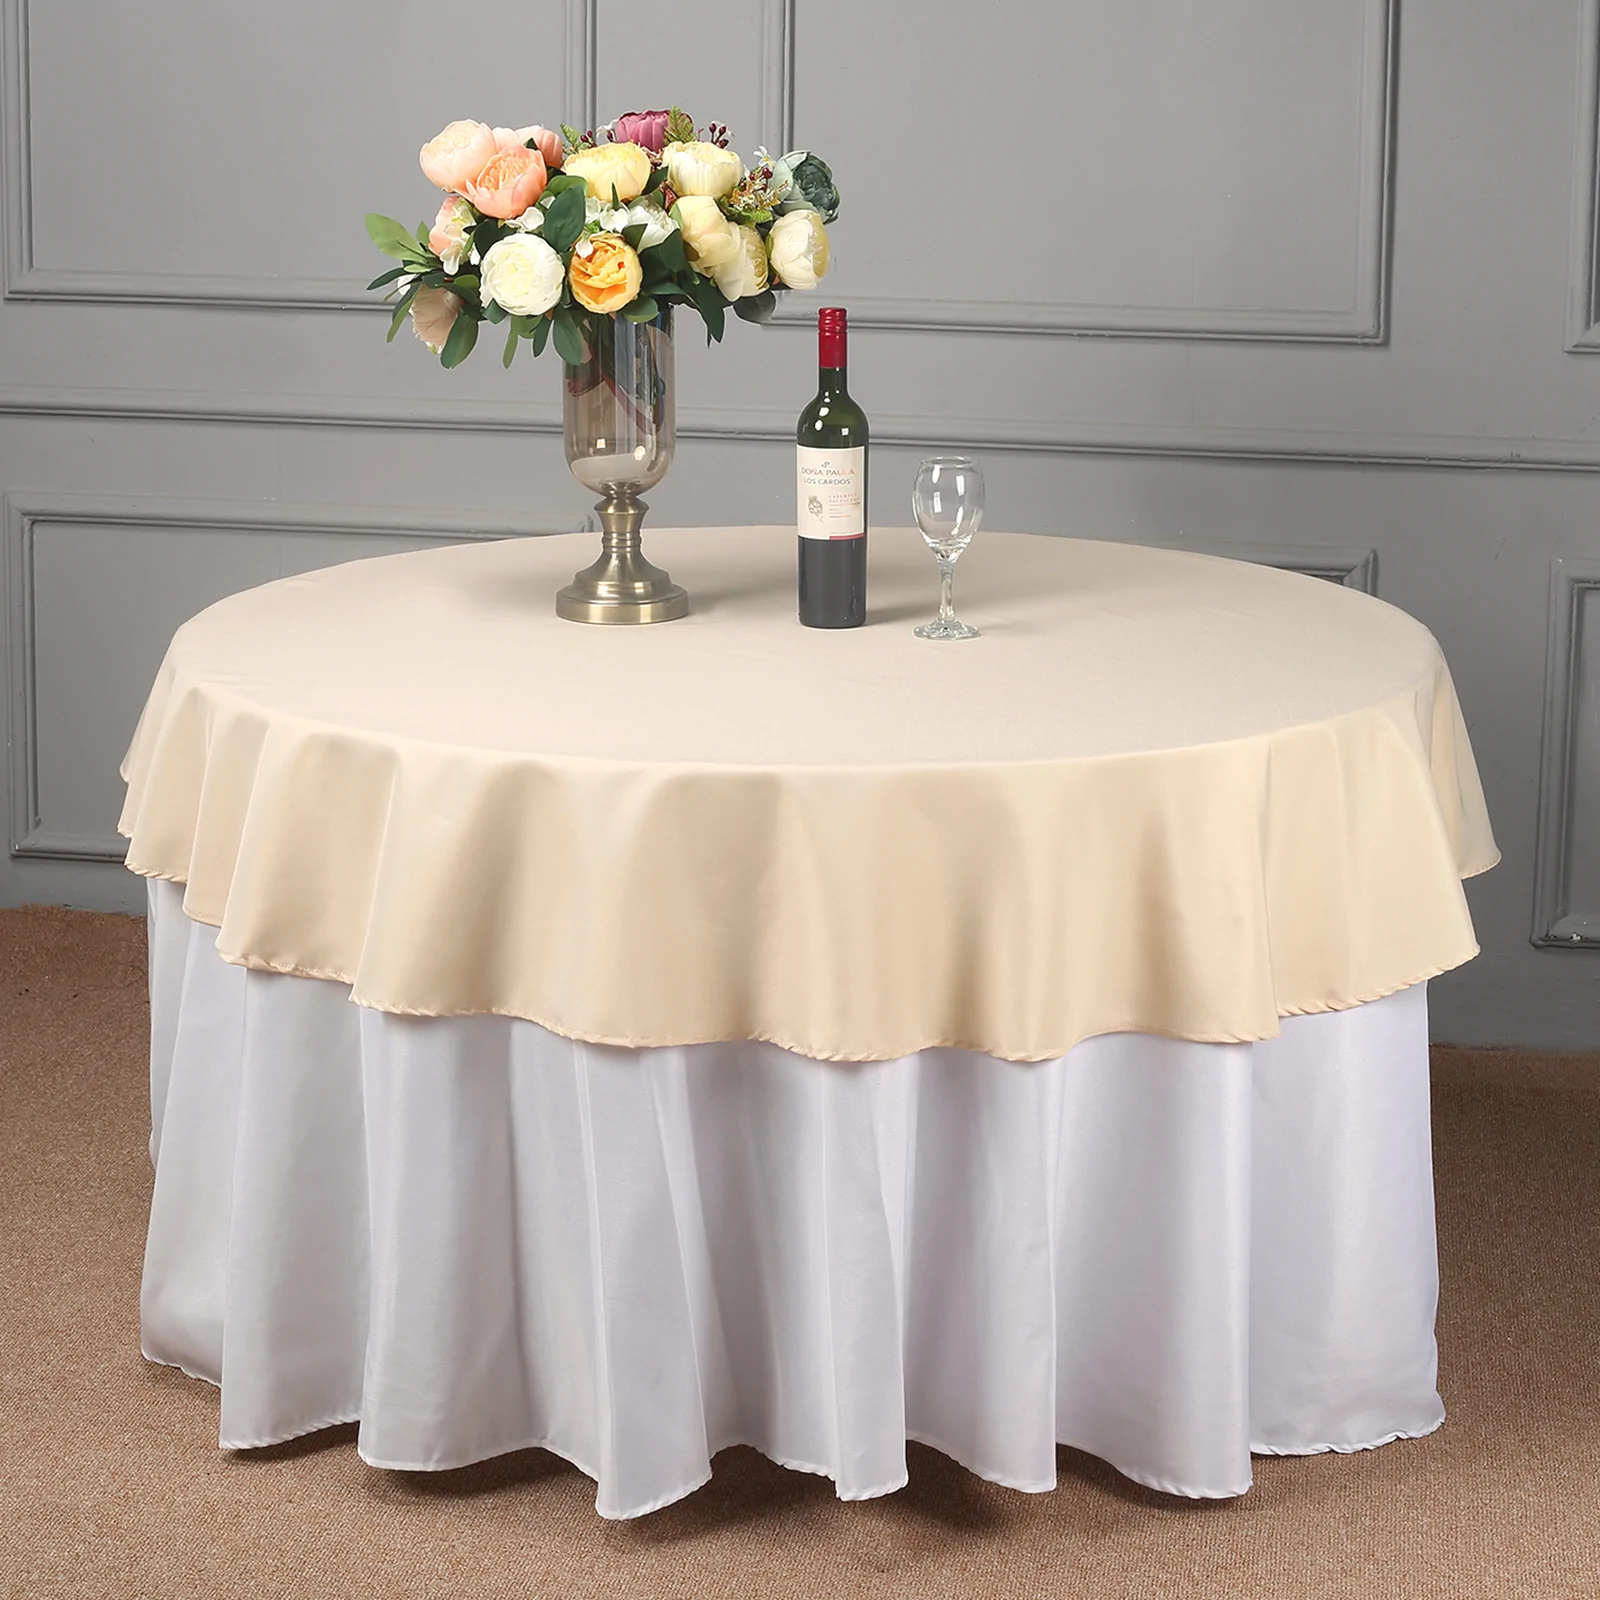 Beige - 70" Tablecloth Round Polyester Wedding Party Banquet Events   - $23.88